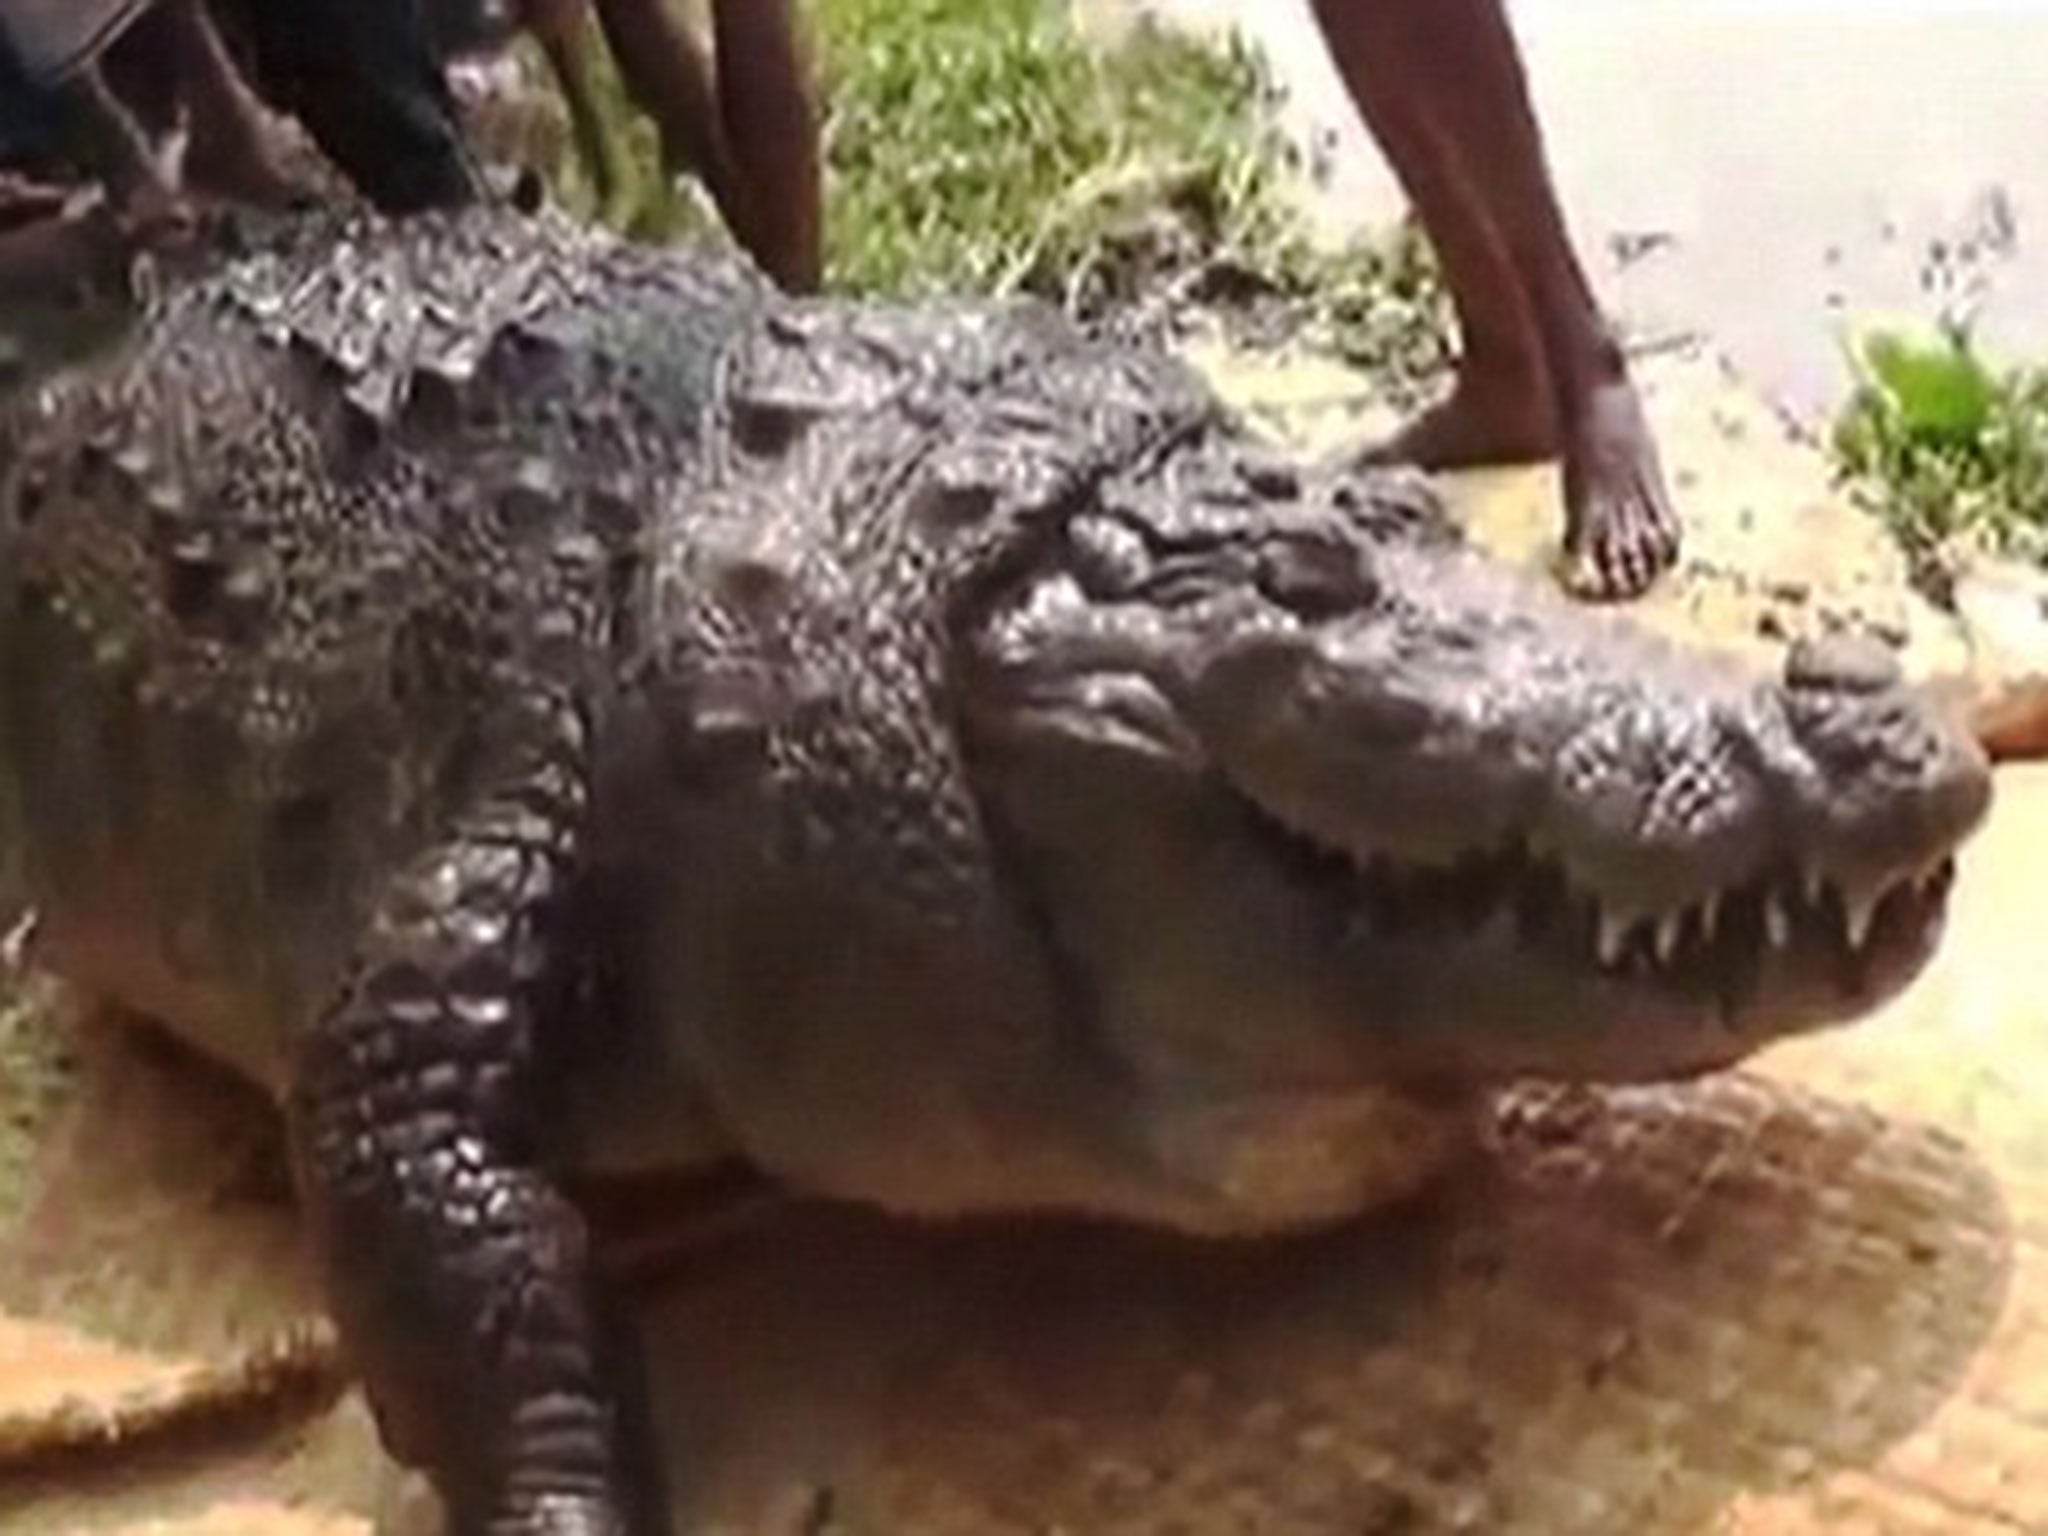 The crocodile was pulled out of the pool by staff at the shrine after they spotted it floating upside down